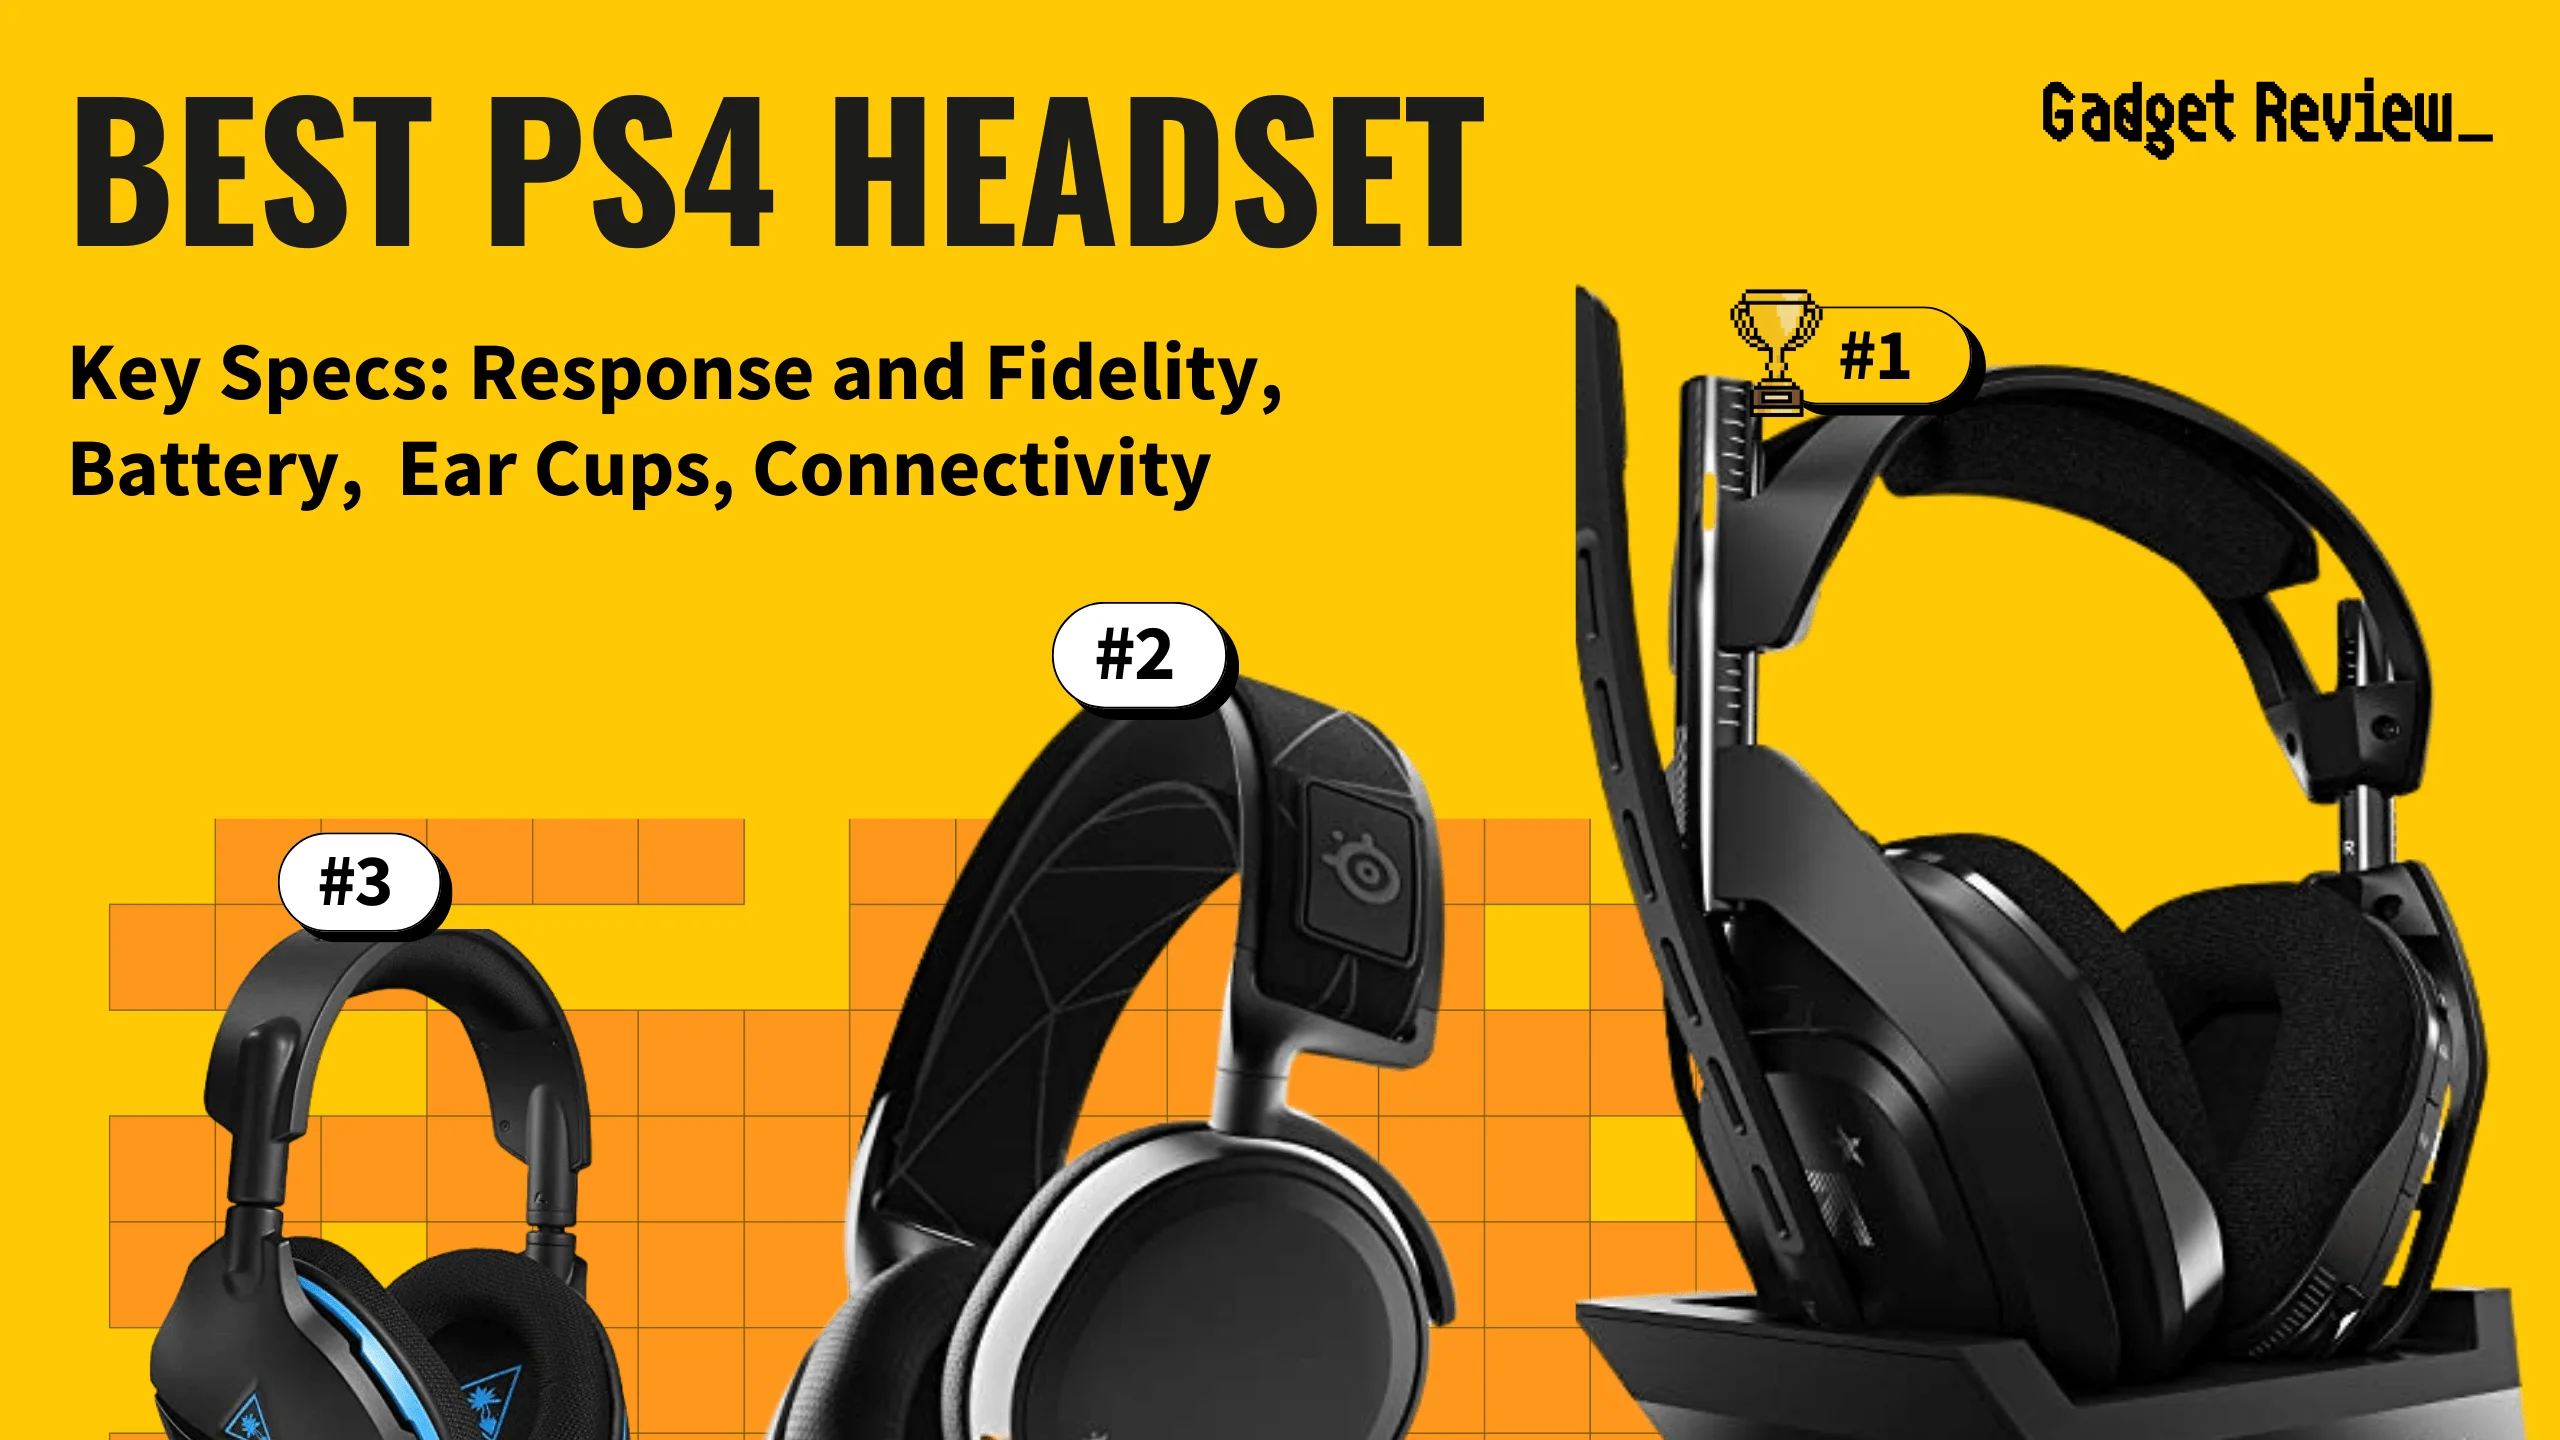 best ps4 headset featured image that shows the top three best gaming headset models